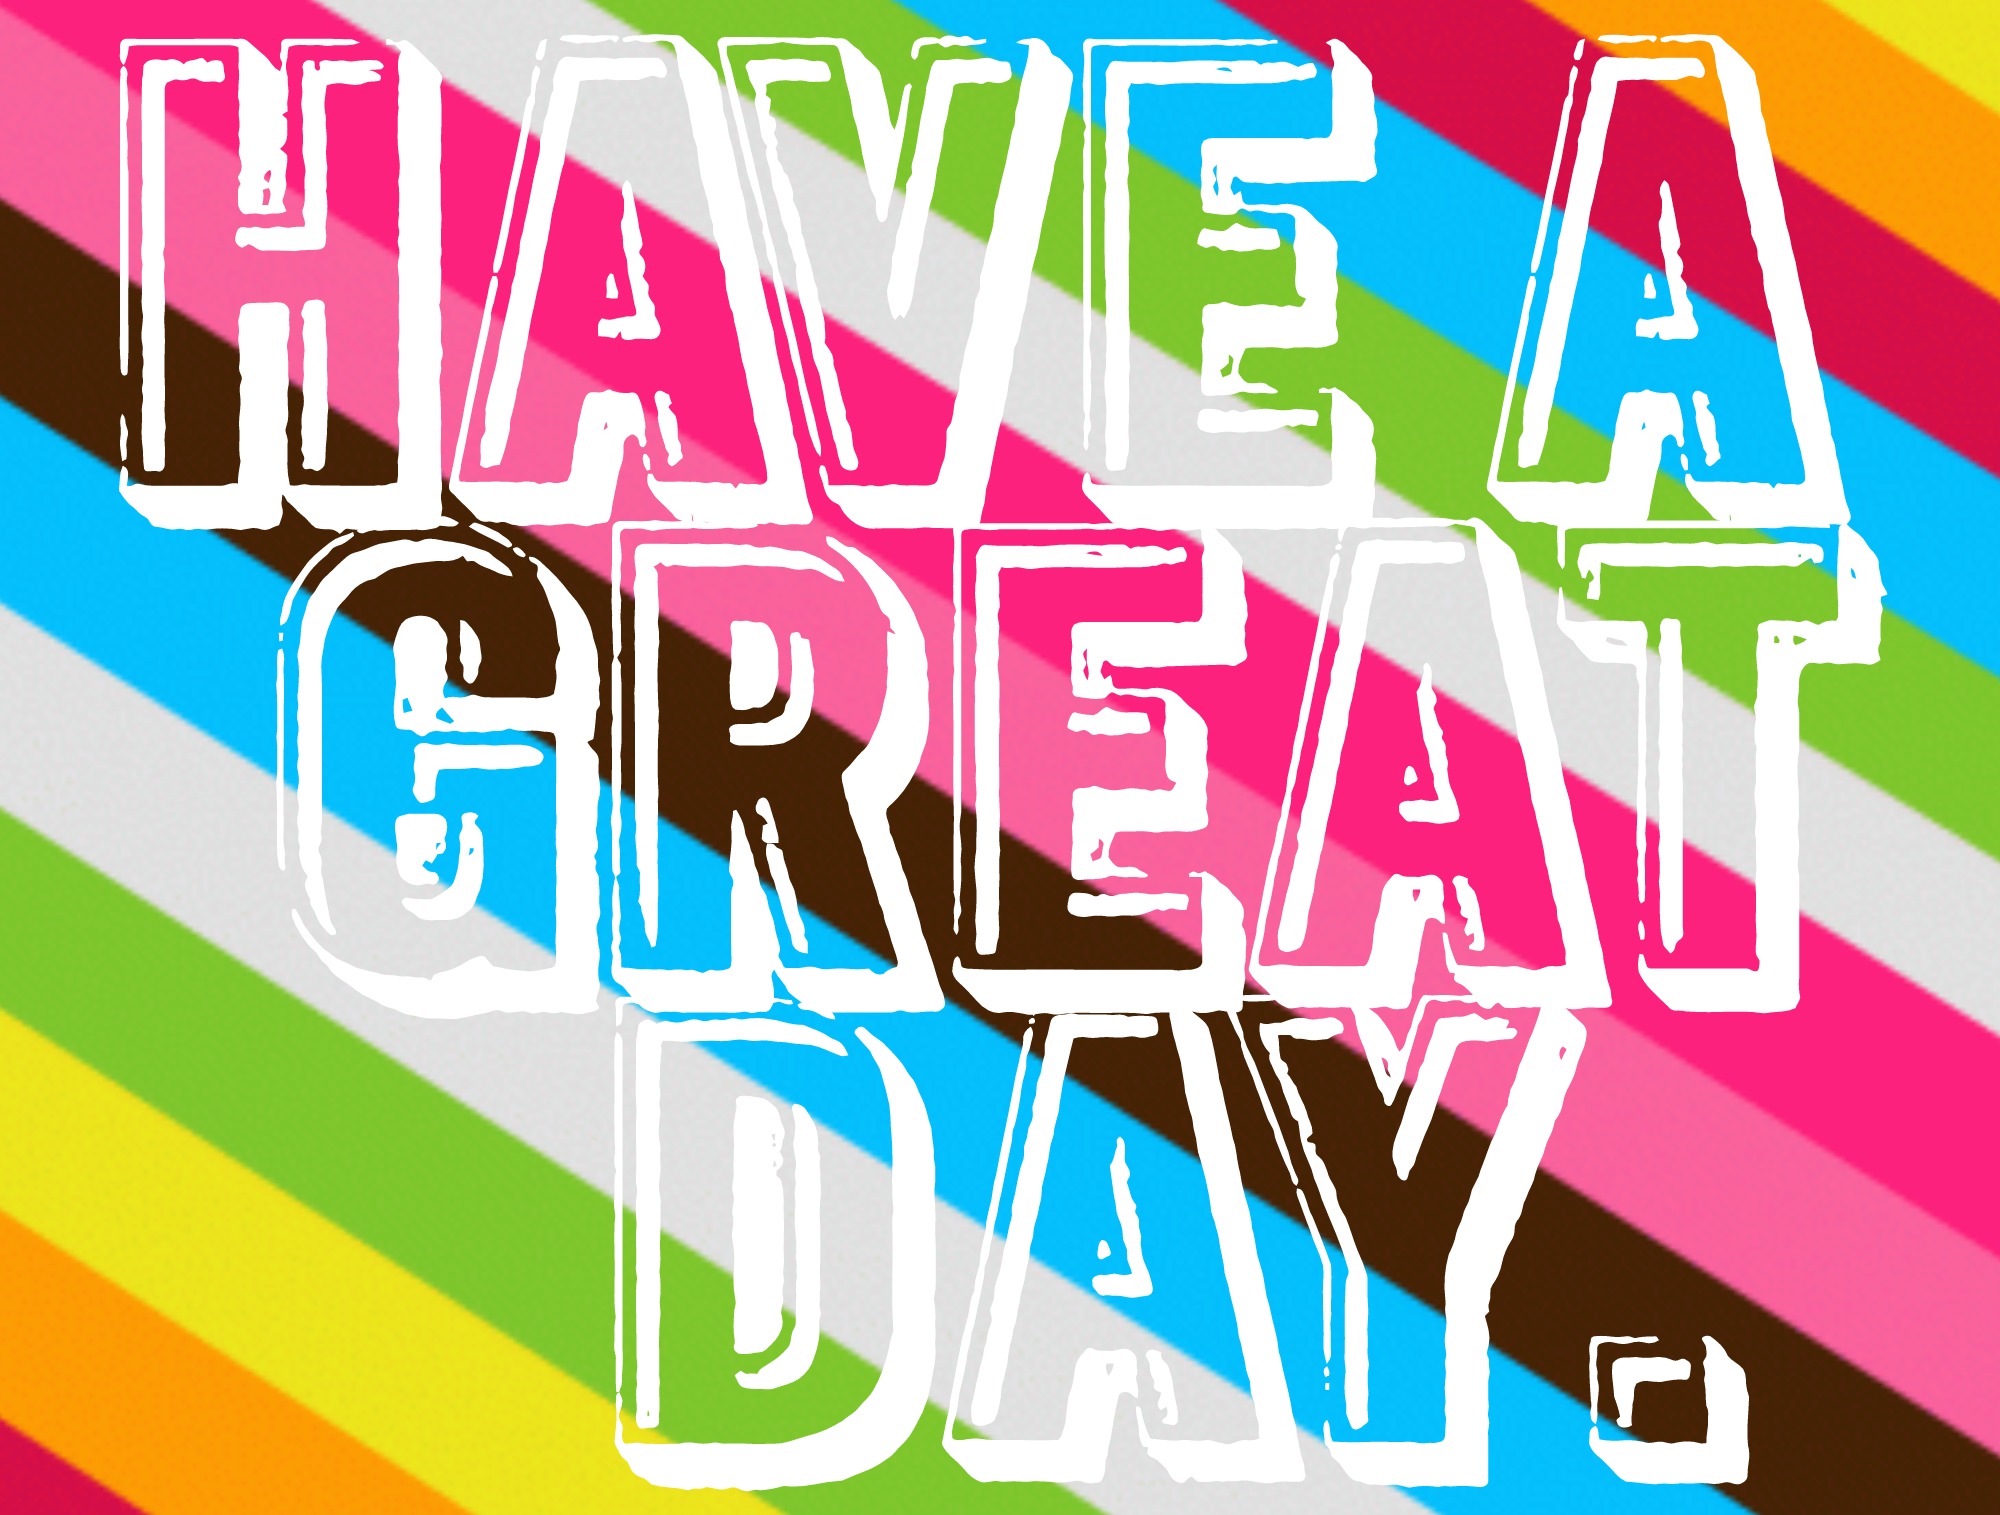 Have A Great Day Clipart